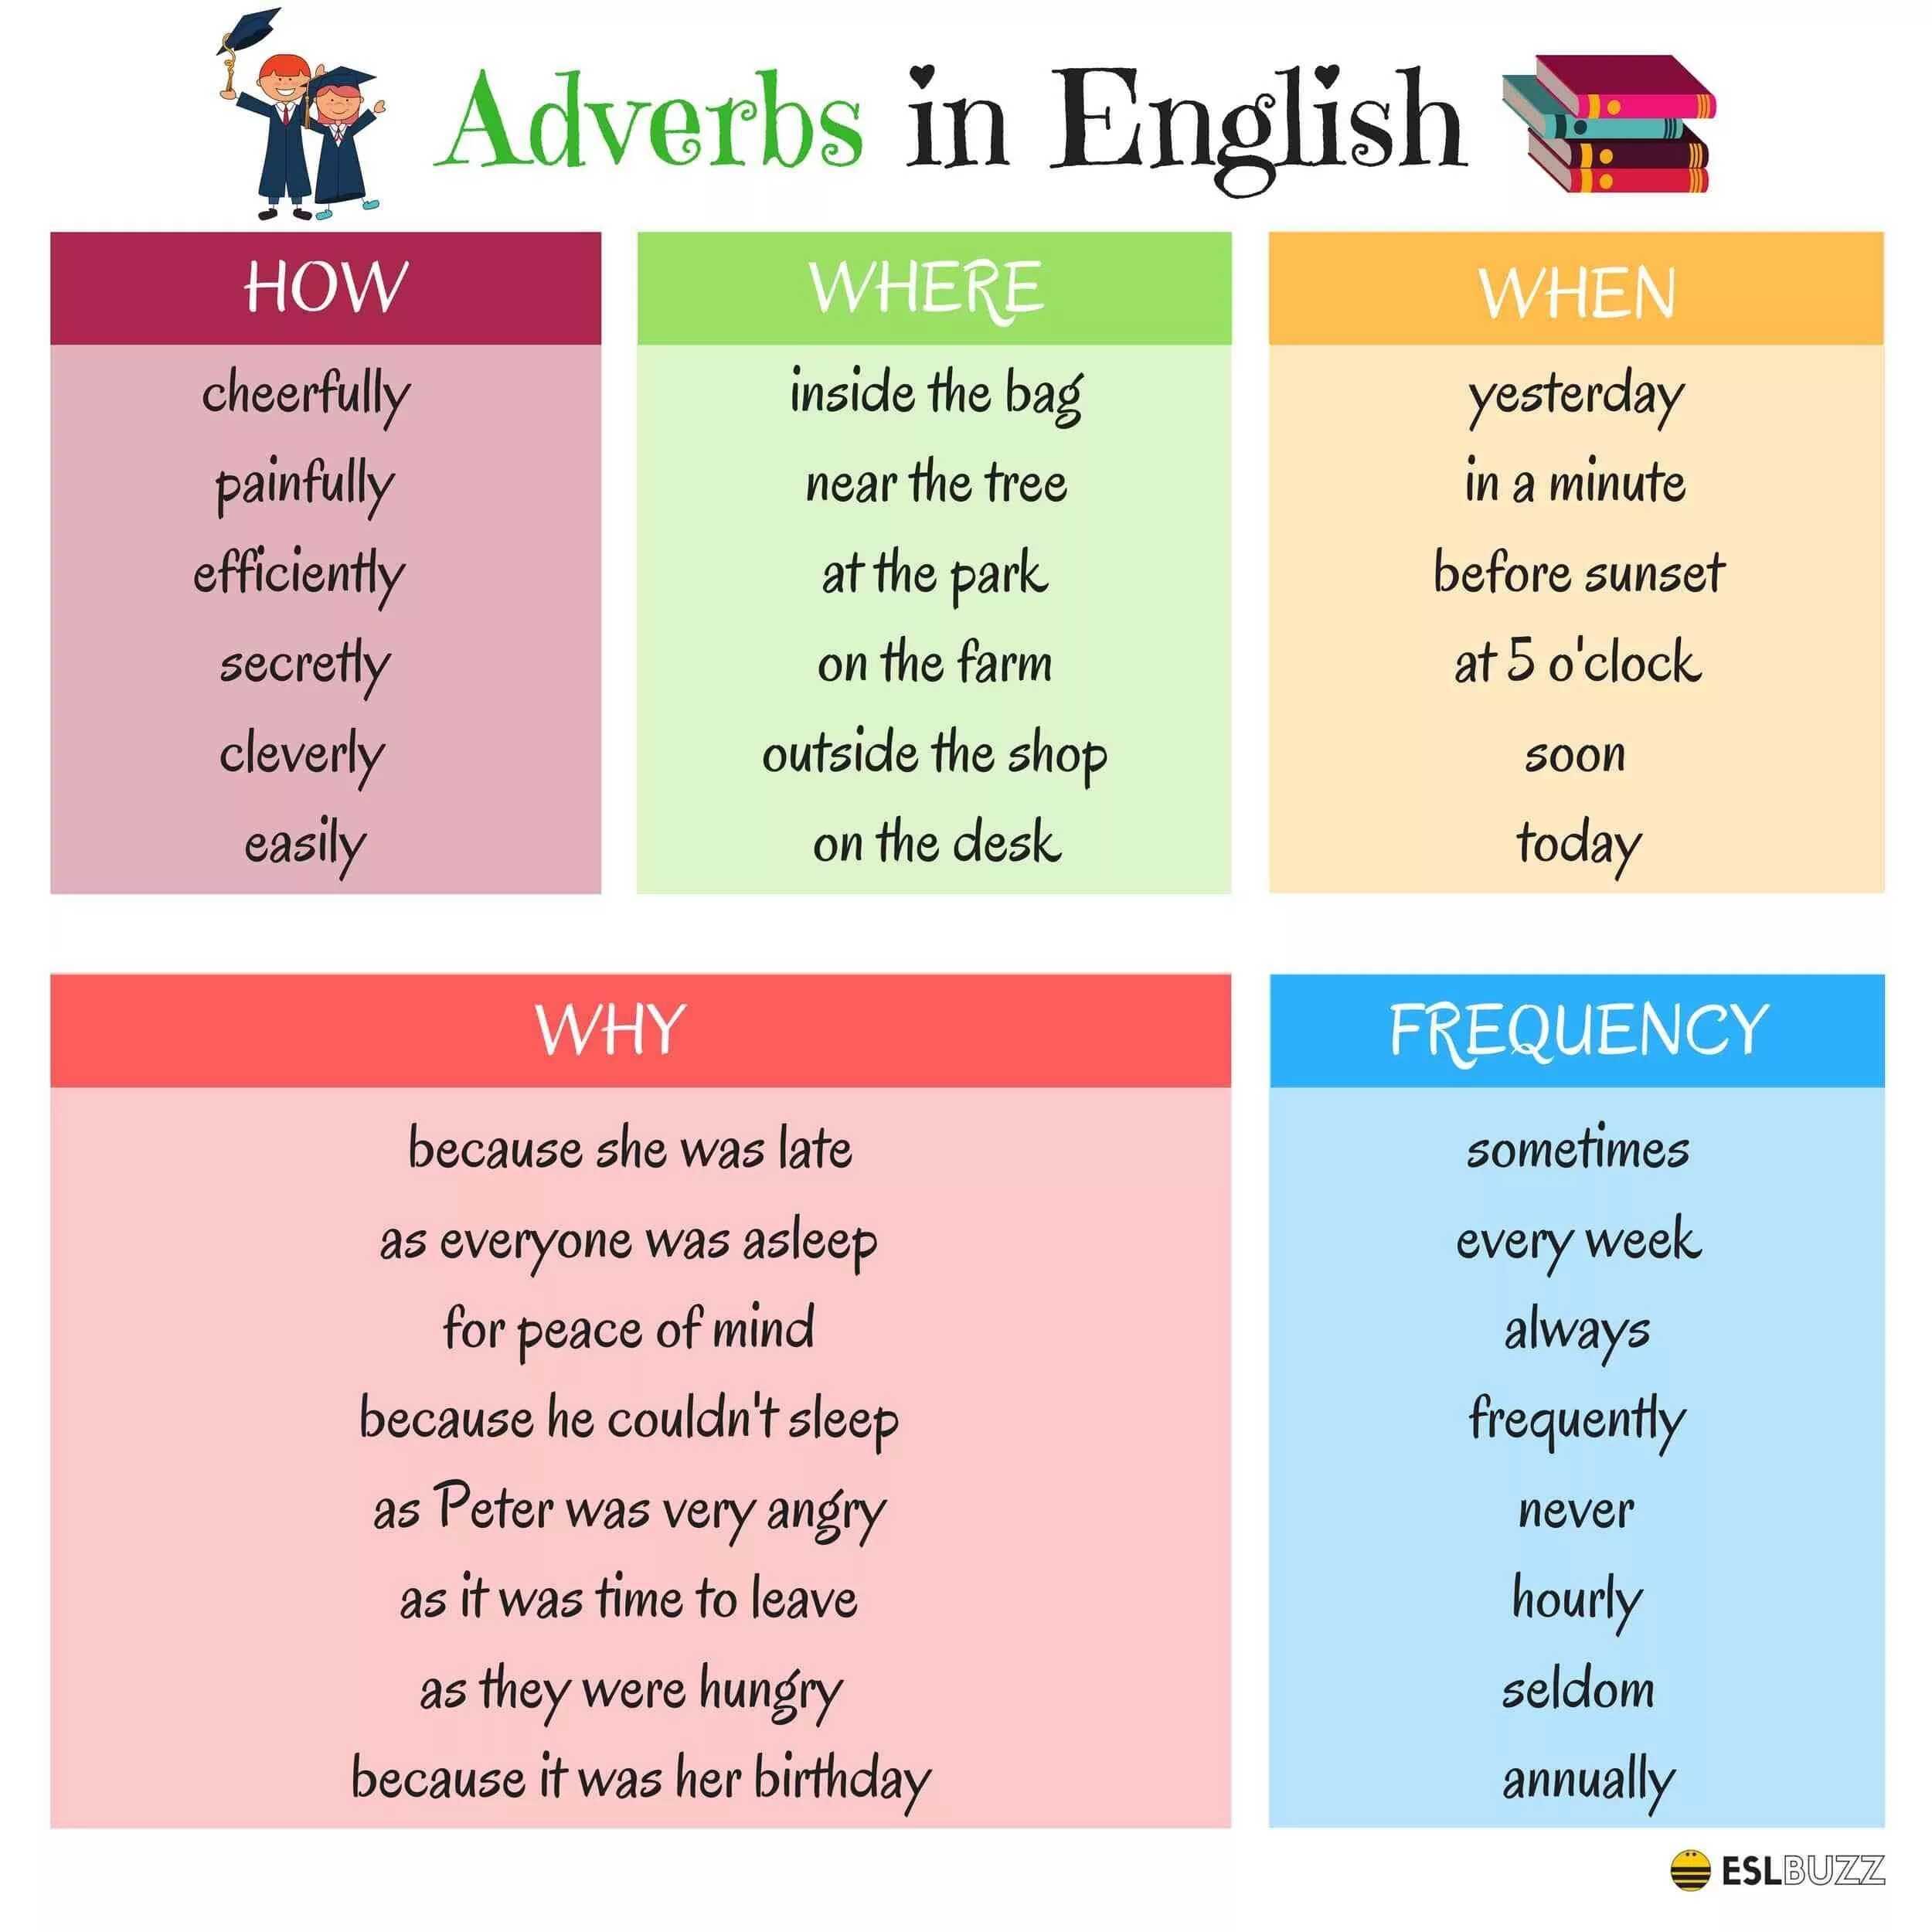 Why she be late. Adverbs in English. Adverbs в английском. Adverbs грамматика. Adverbs in English правила.